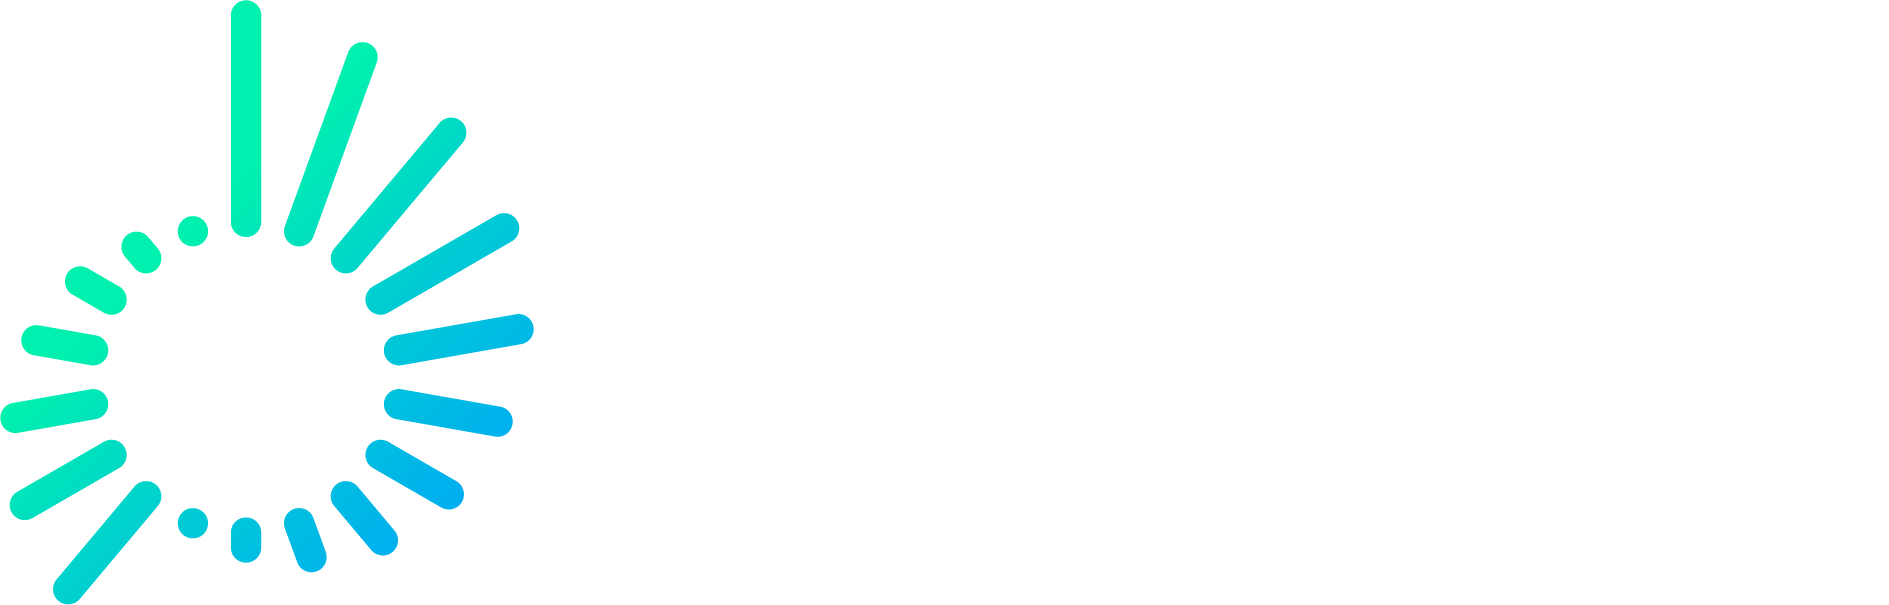 MICHELIN Connected Fleet powered by Masternaut